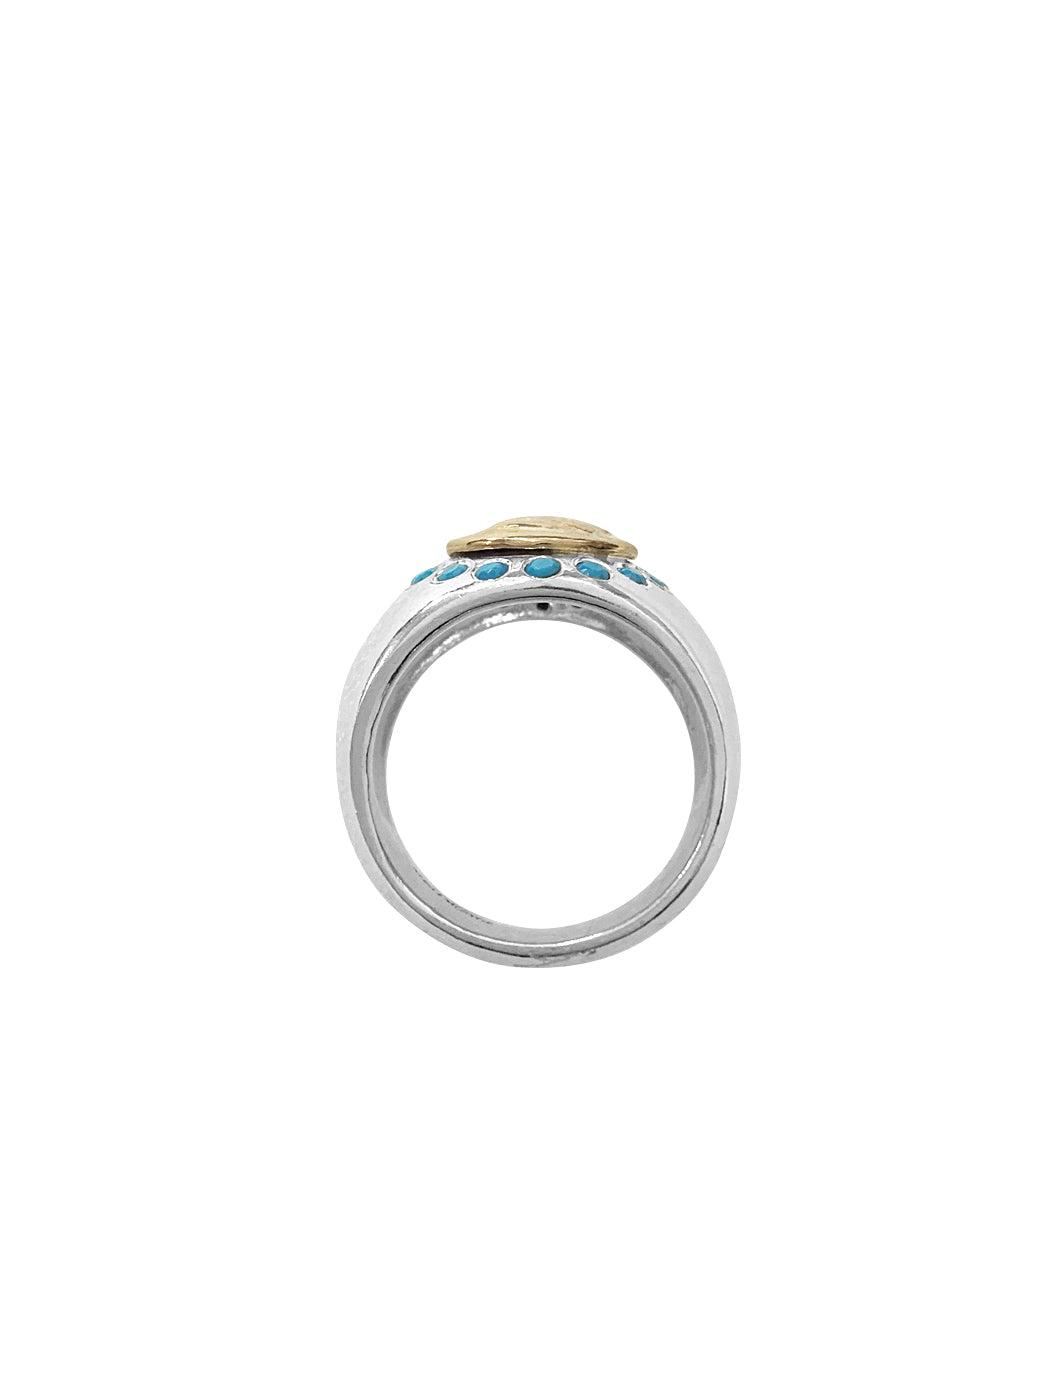 Fiorina Jewellery Nile Ring Side View